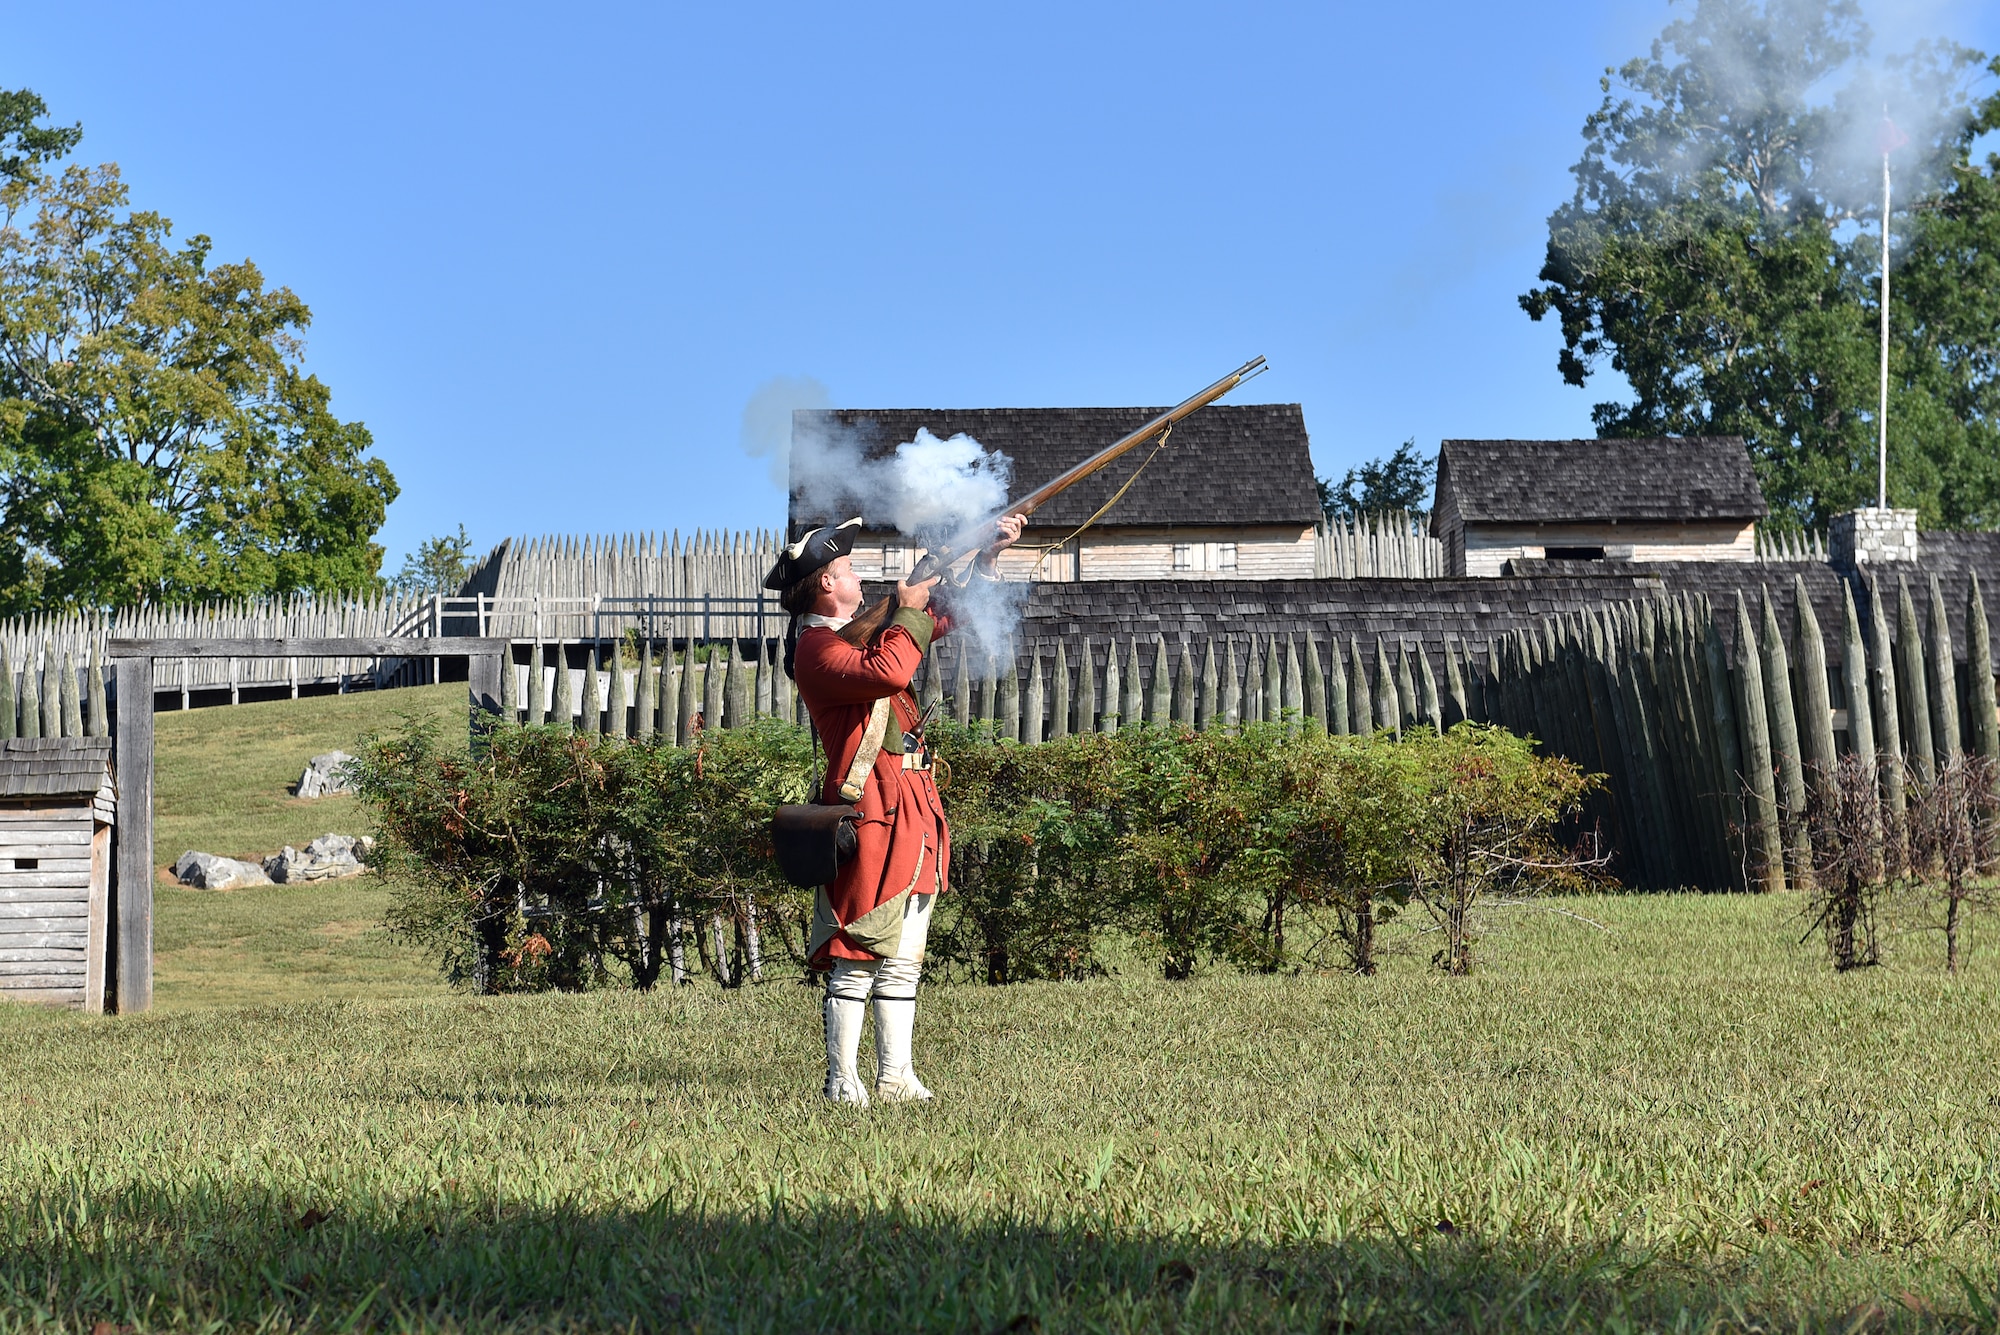 Noncommissioned officers from five nations and the United States tour Fort Loudoun State Historic Area Sept. 20, 2016, in Vonore, Tenn., as part of a cultural day. The area is a Tennessee River peninsula that surrounds Fort Loudoun. The fort once housed British soldiers as a western outpost from 1756-1760 and served relations with the Cherokee. The Air National Guard's I.G. Brown Training and Education Center is hosting the NCOs this week for the International Noncommissioned Officer Development Seminar. (U.S. Air National Guard photo by Master Sgt. Mike R. Smith)